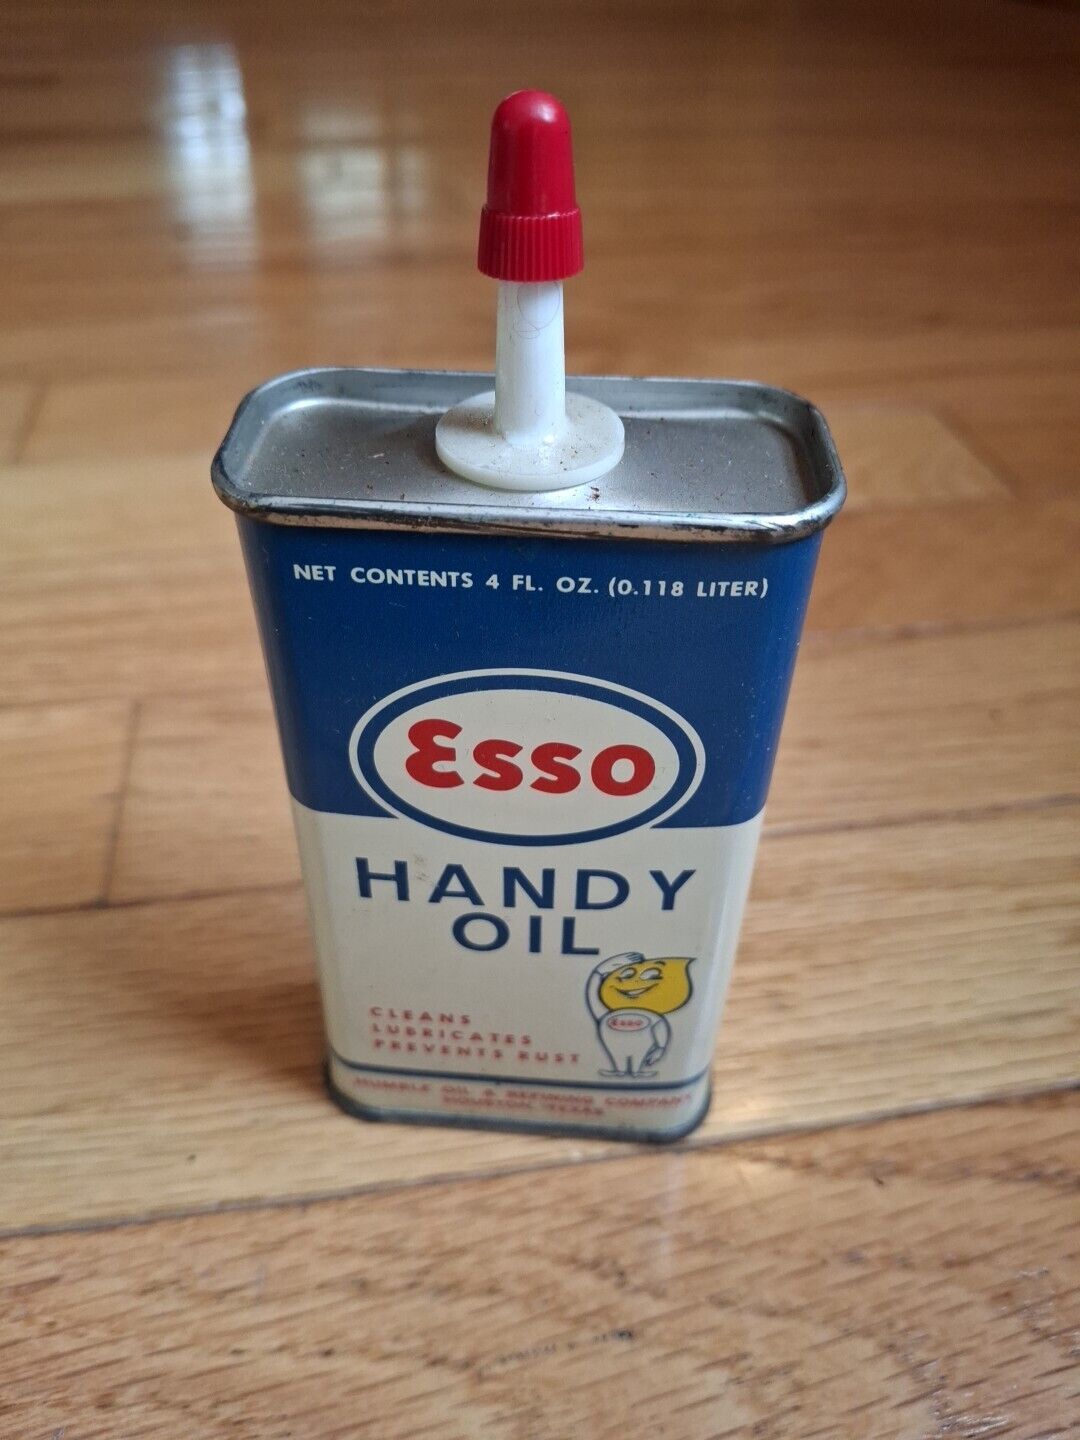 Vintage Advertising ESSO 4 Oz Handy Oil Can Houston, Texas Humble Oil -  OPENED